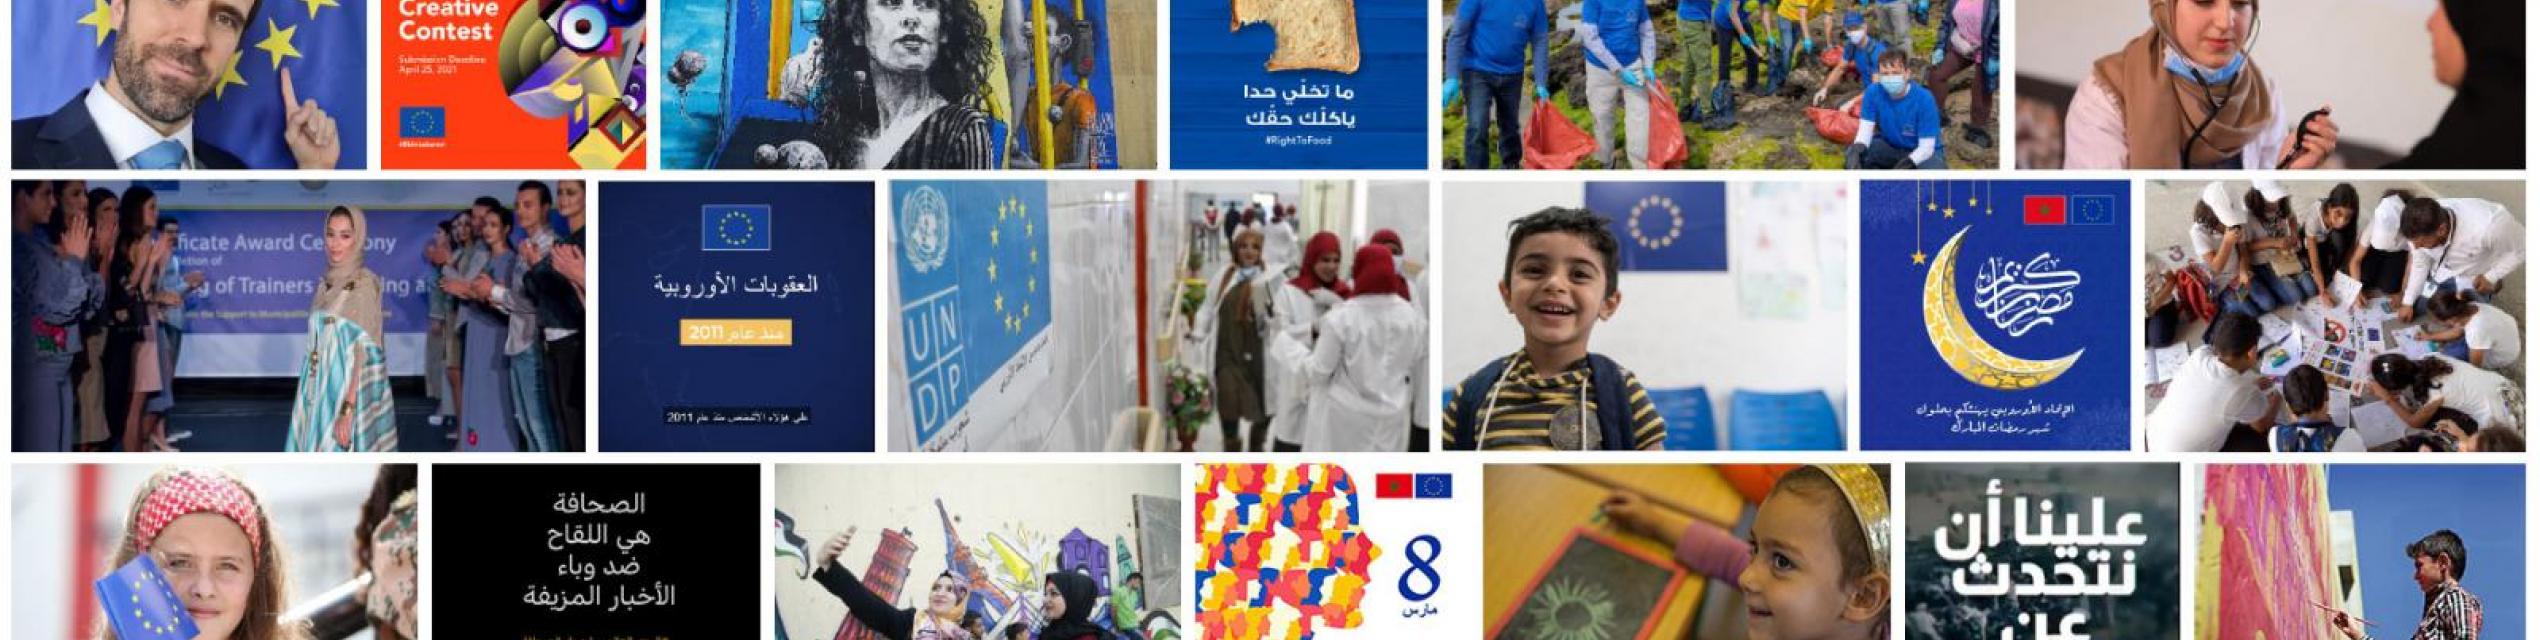 Collage of different images for EU in Arabic 